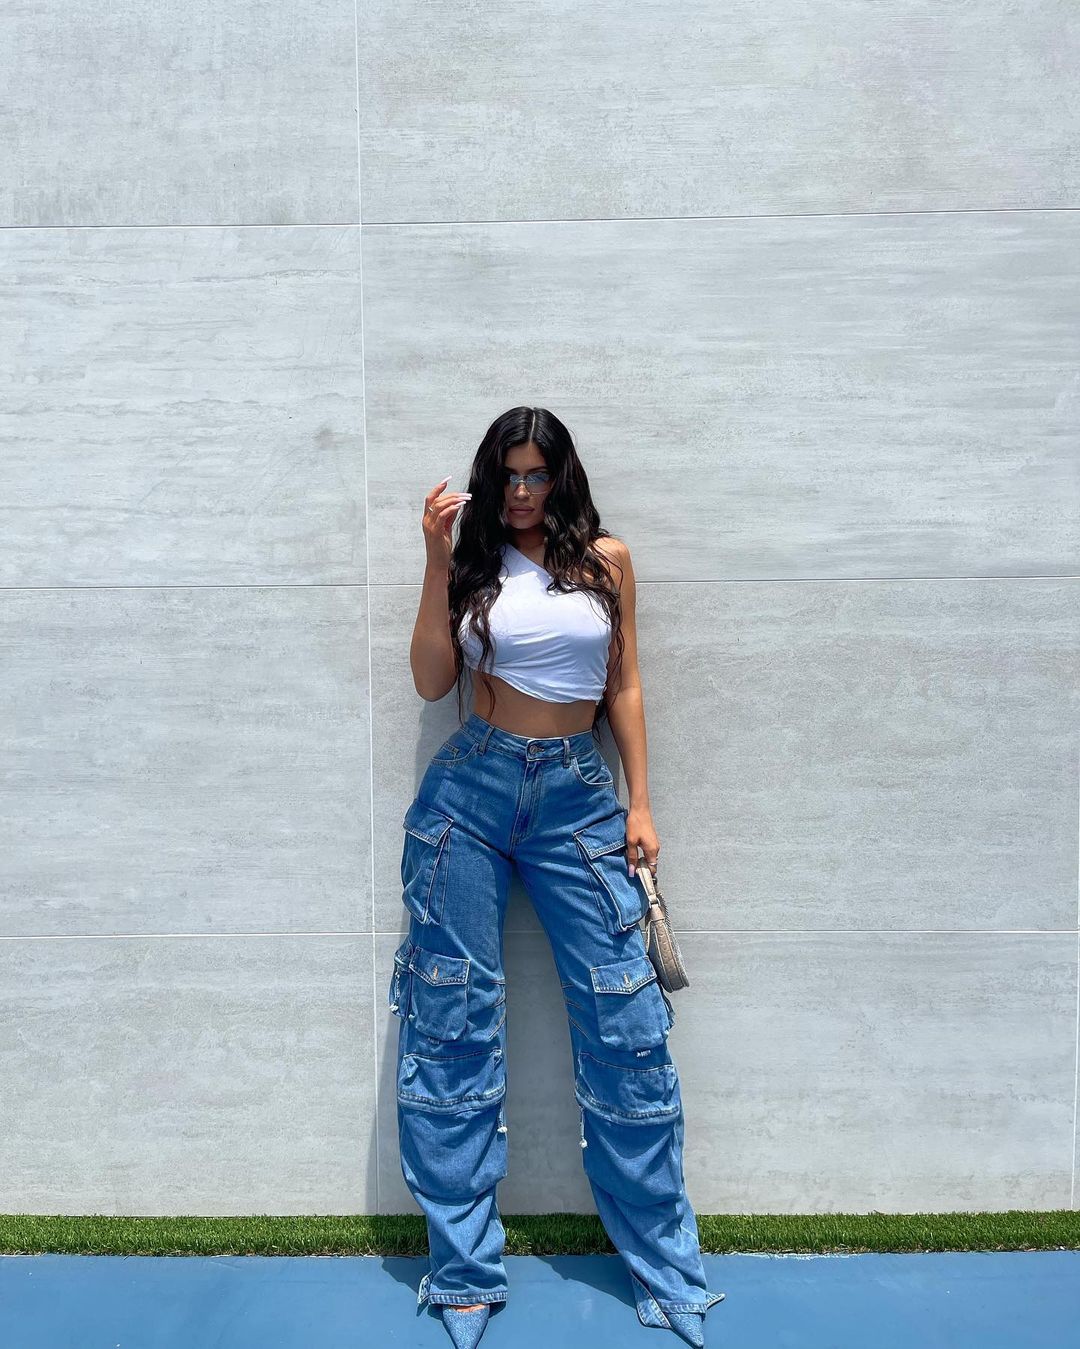 Kylie Jenner Photoshoot in White Crop Top and Multi-Pocket Jeans 06/30/2021